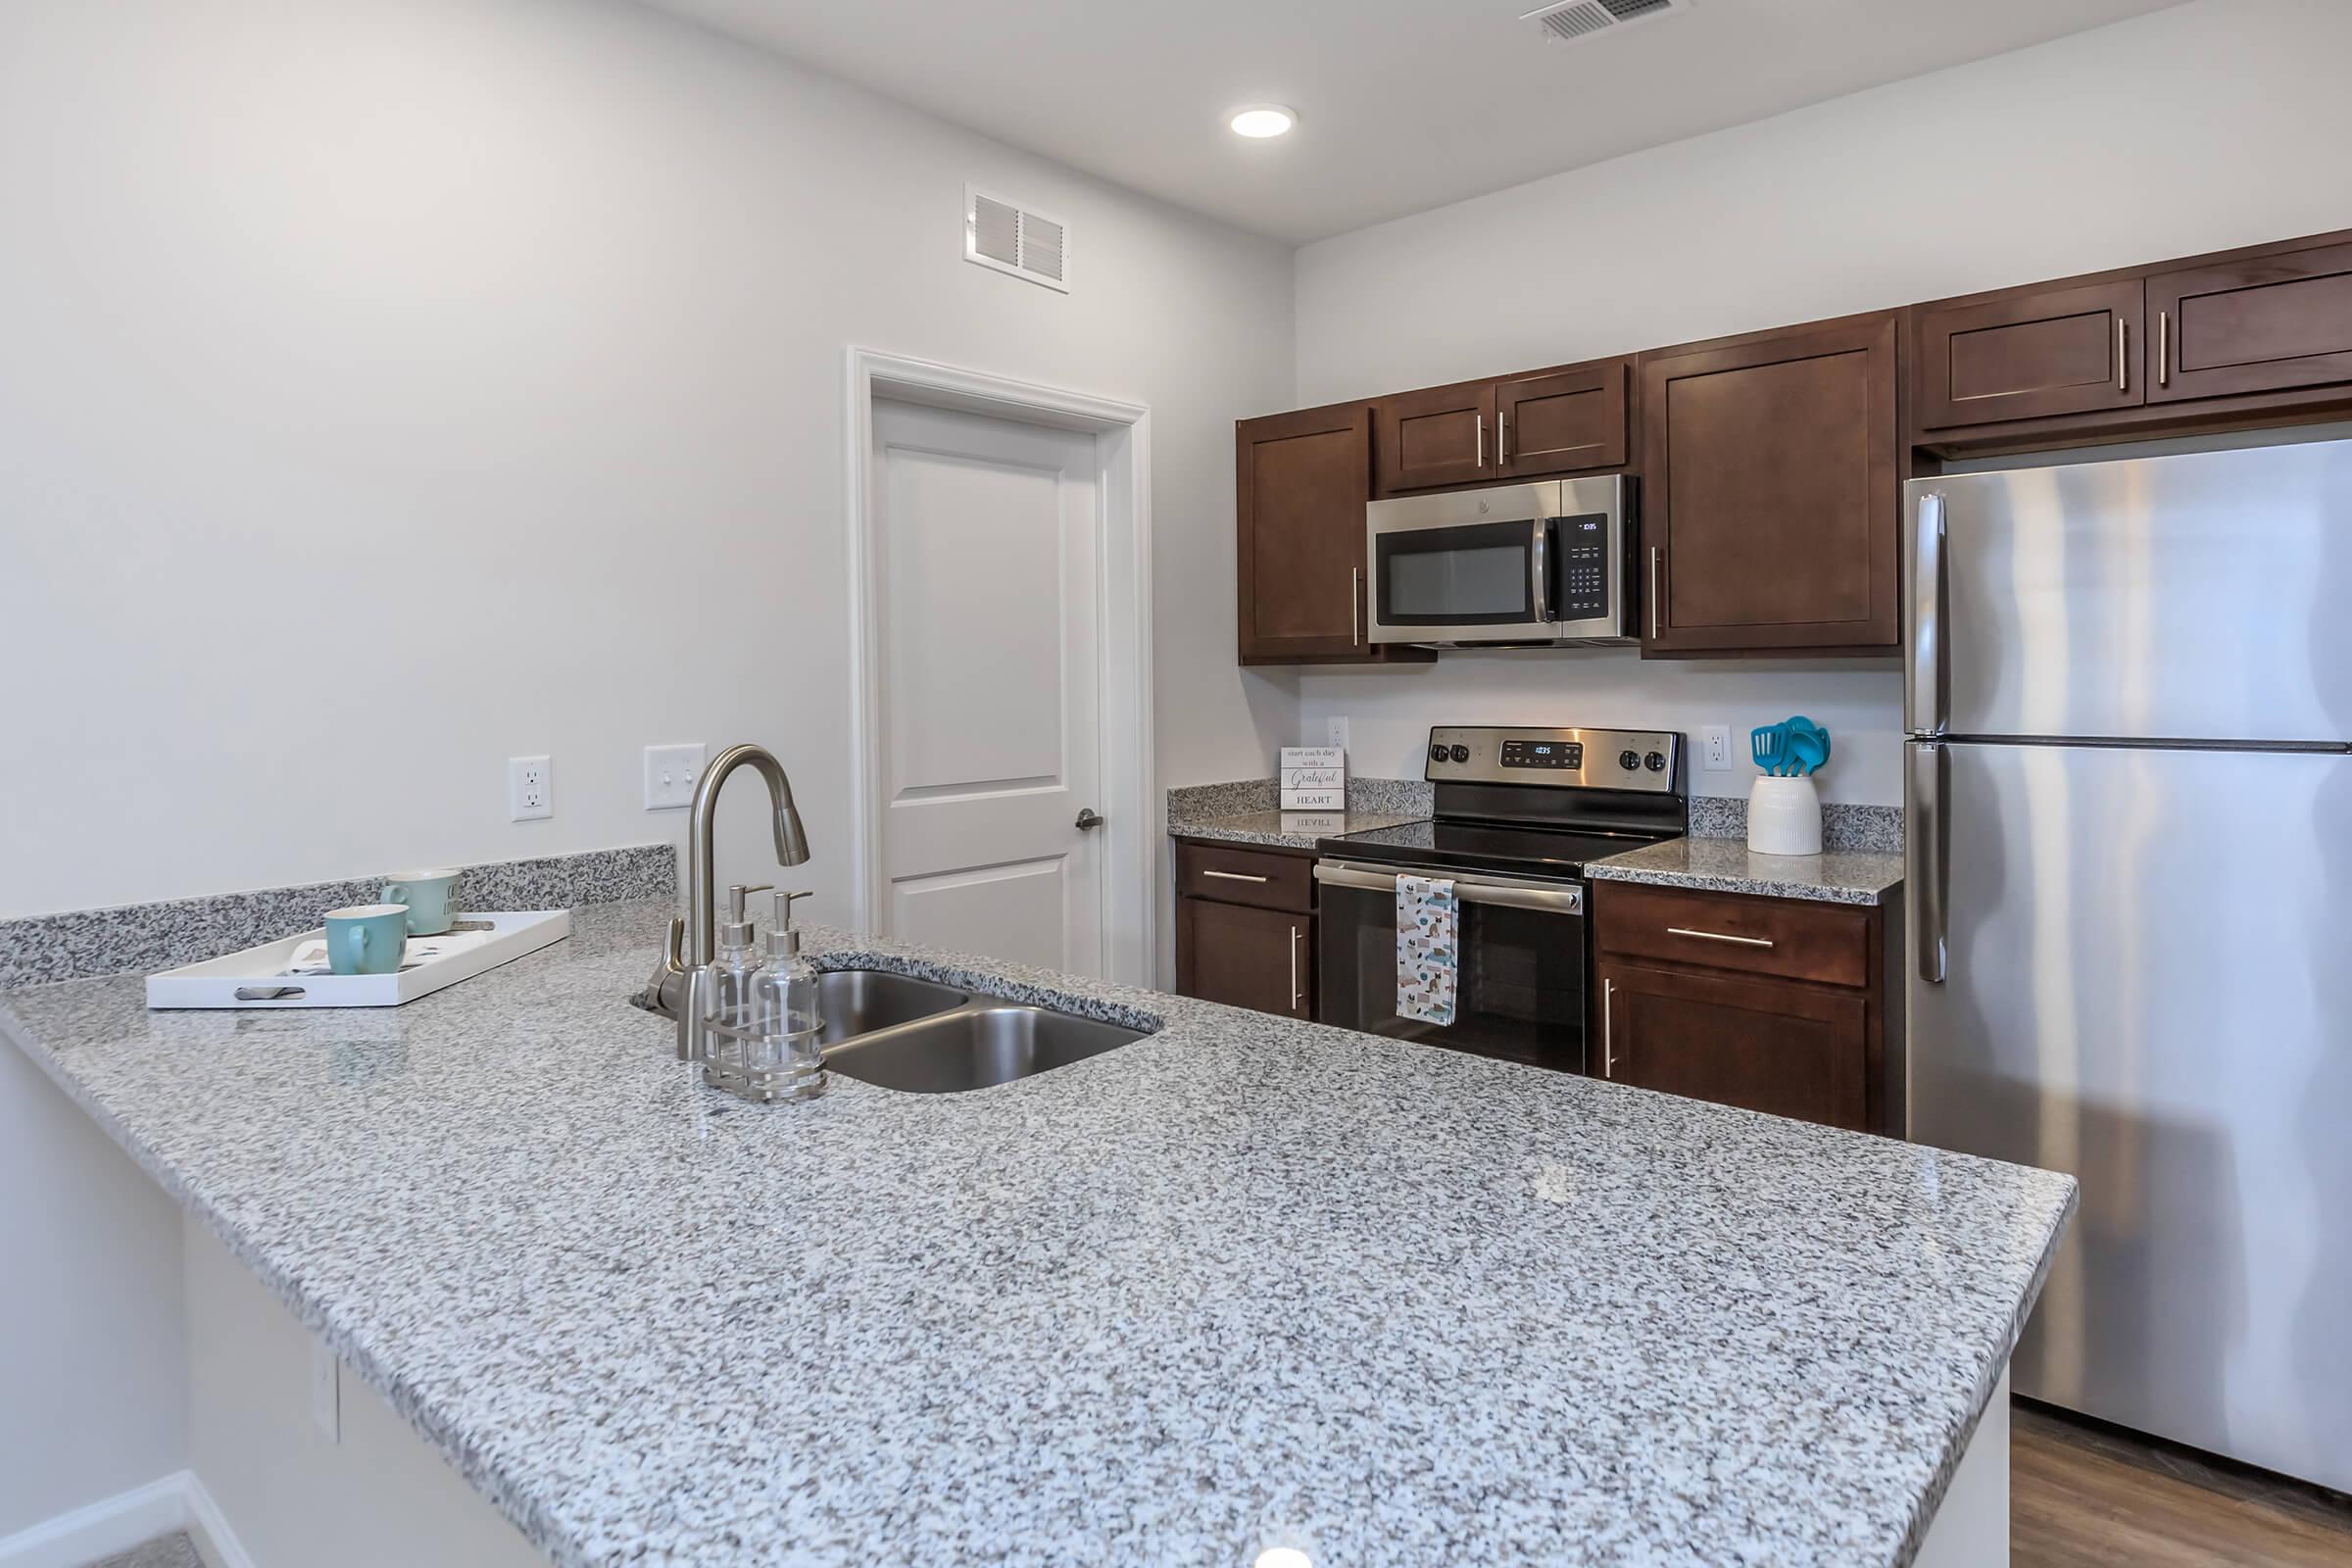 Modern Kitchen In Riverstone Apartments At Long Shoals In Arden, NC